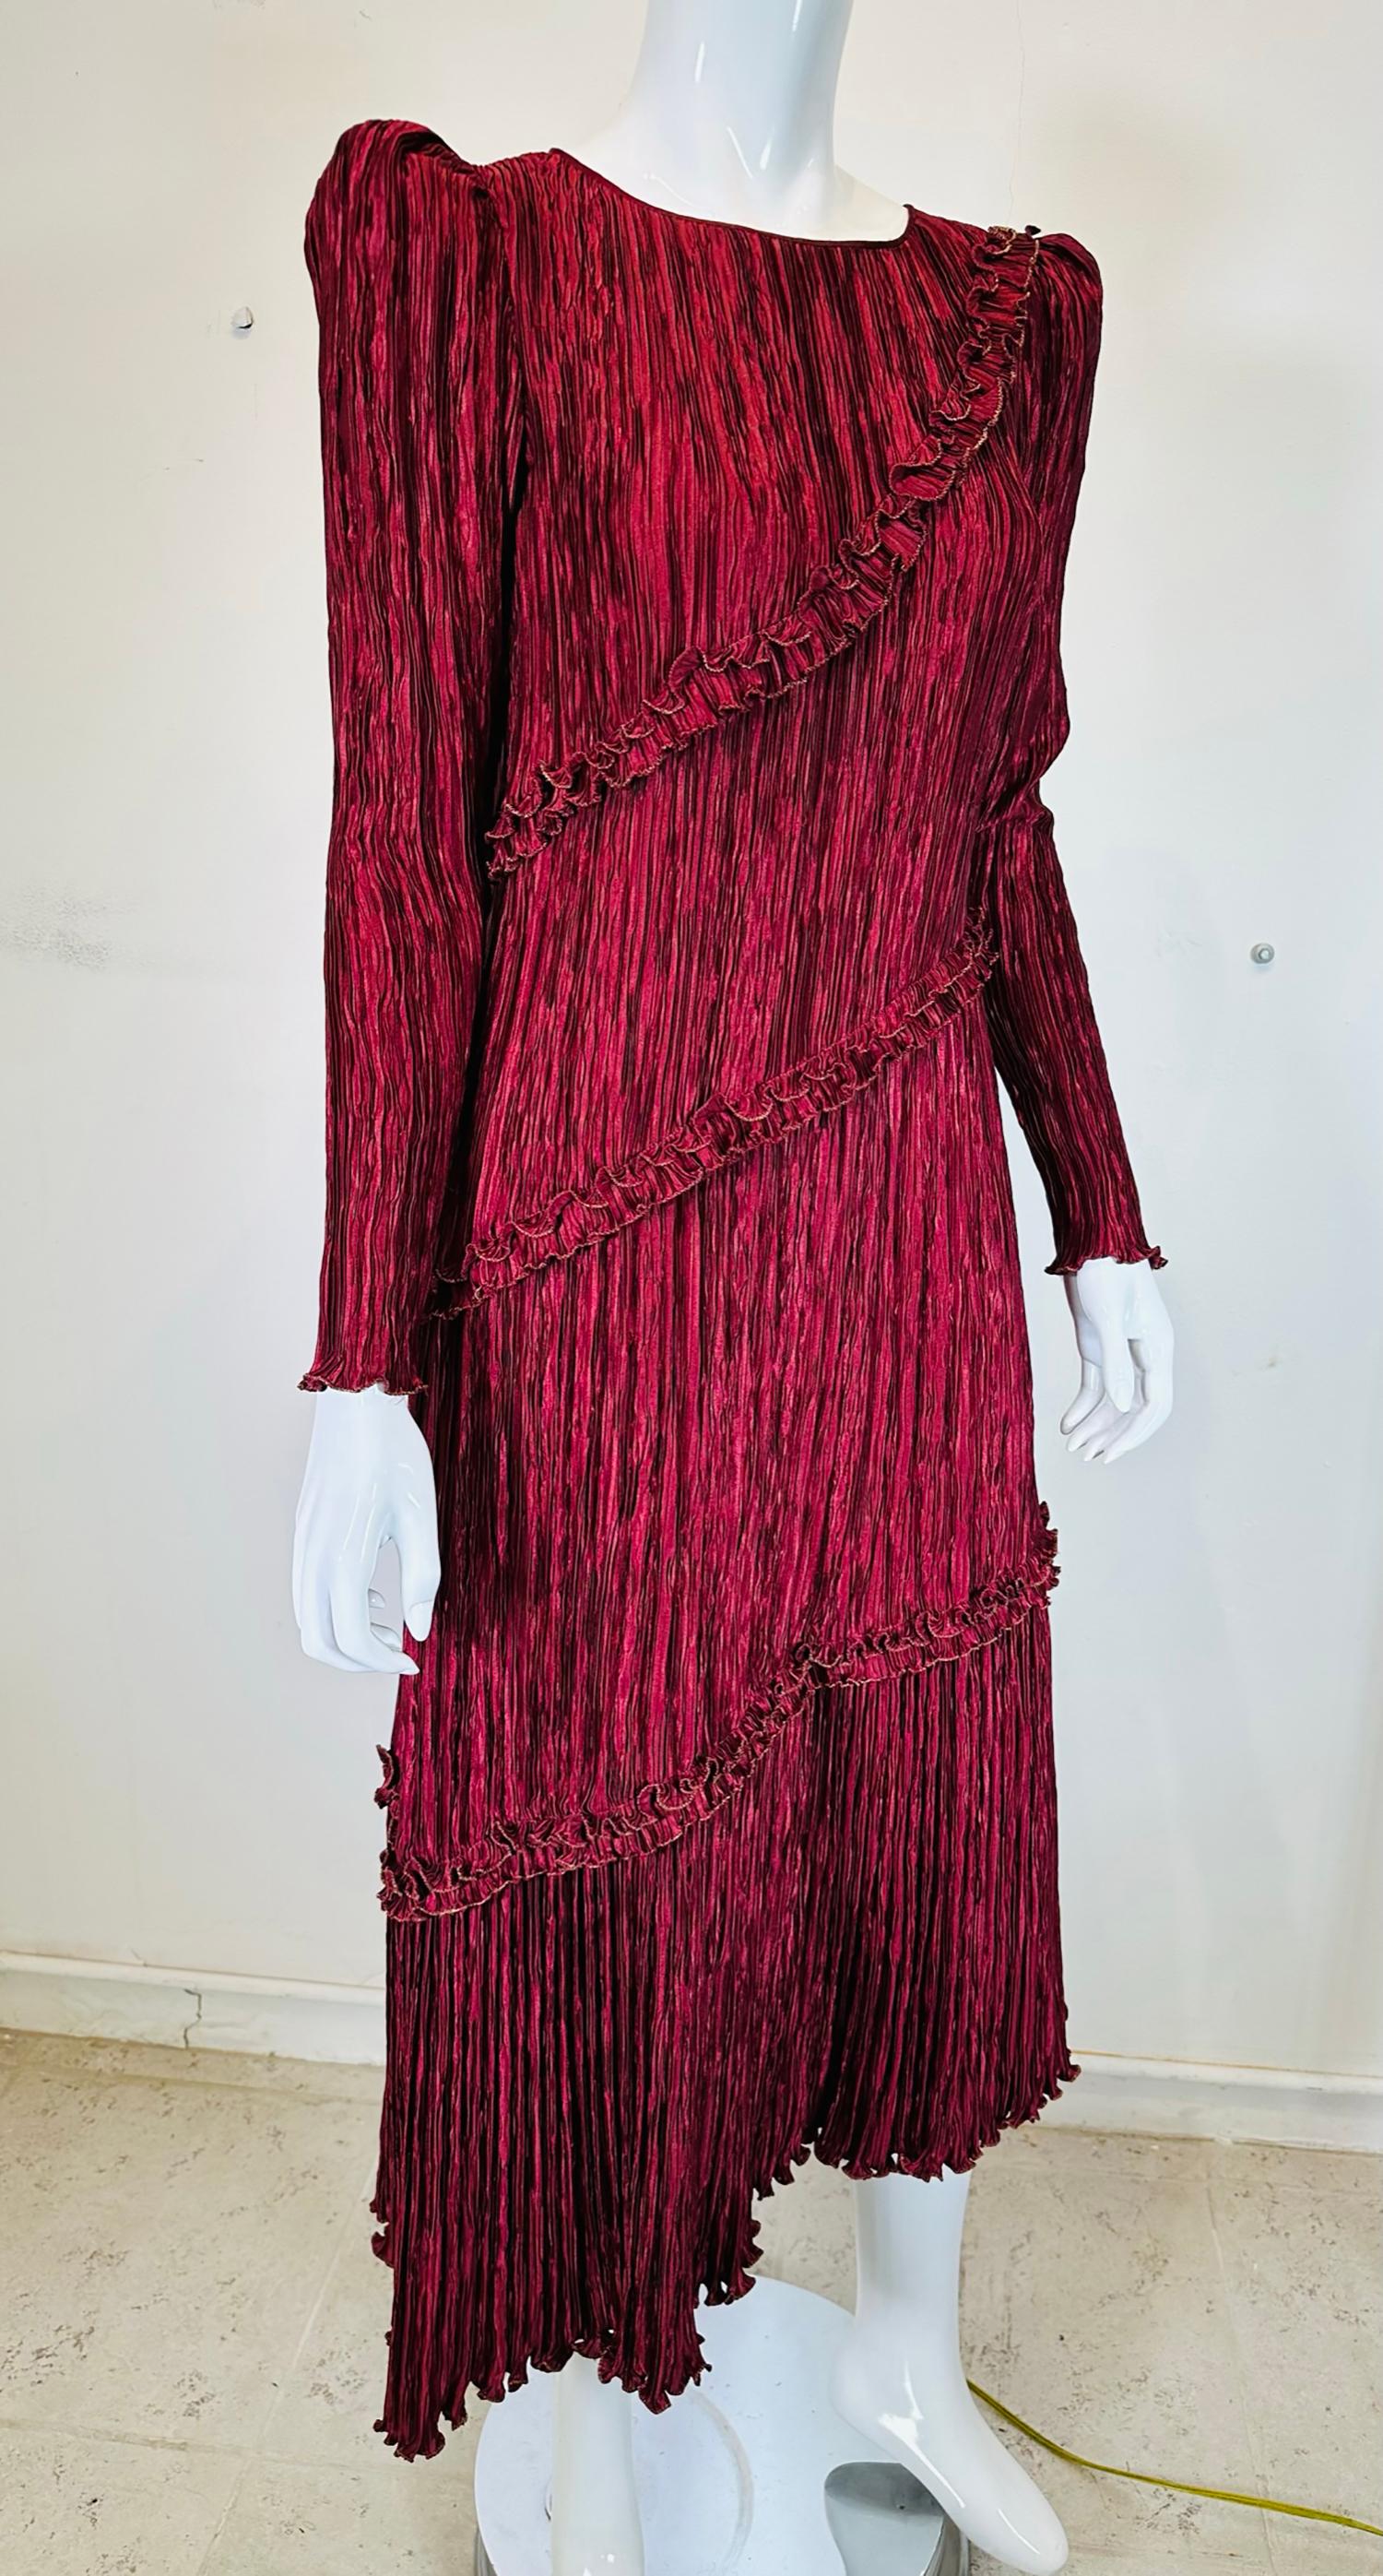 Mary McFadden garnet & gold pleated, peaked shoulder asymmetrical hem dress from the 1970s. Famous for her interpretation of Mario Fortuny's magically pleated silk gowns done in the early 1900s, Mary McFadden made her pleats permanent, which in may